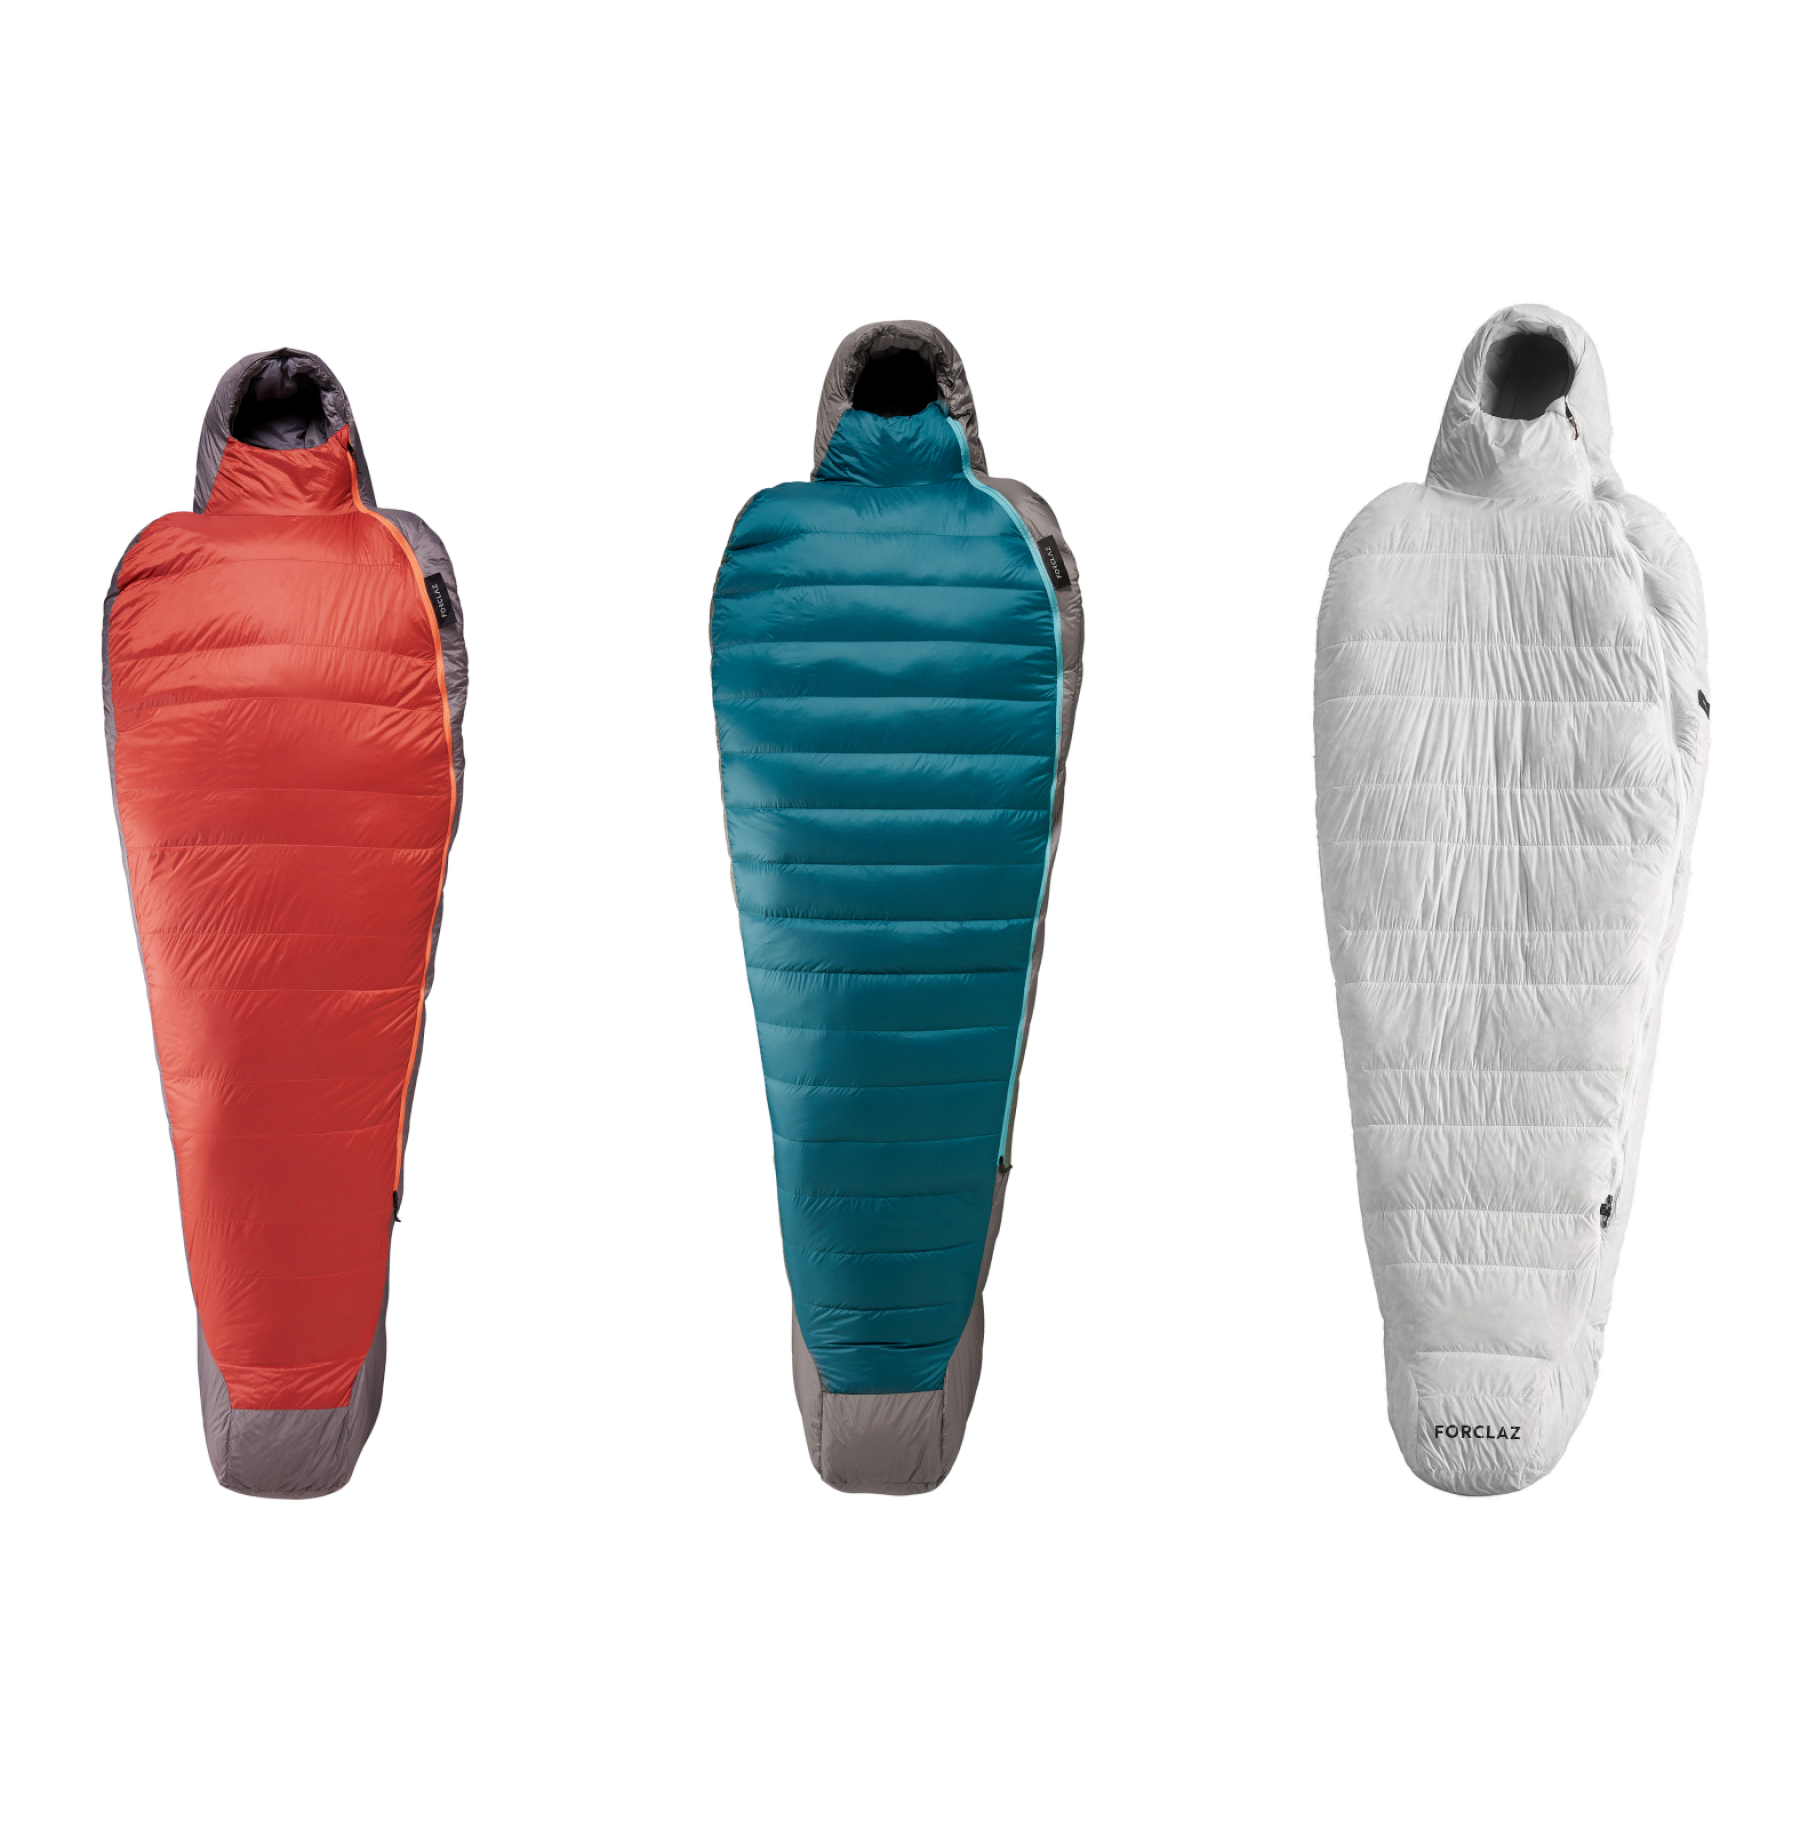 Unstuffed: Store Your Sleeping Bag the Right Way | GearJunkie